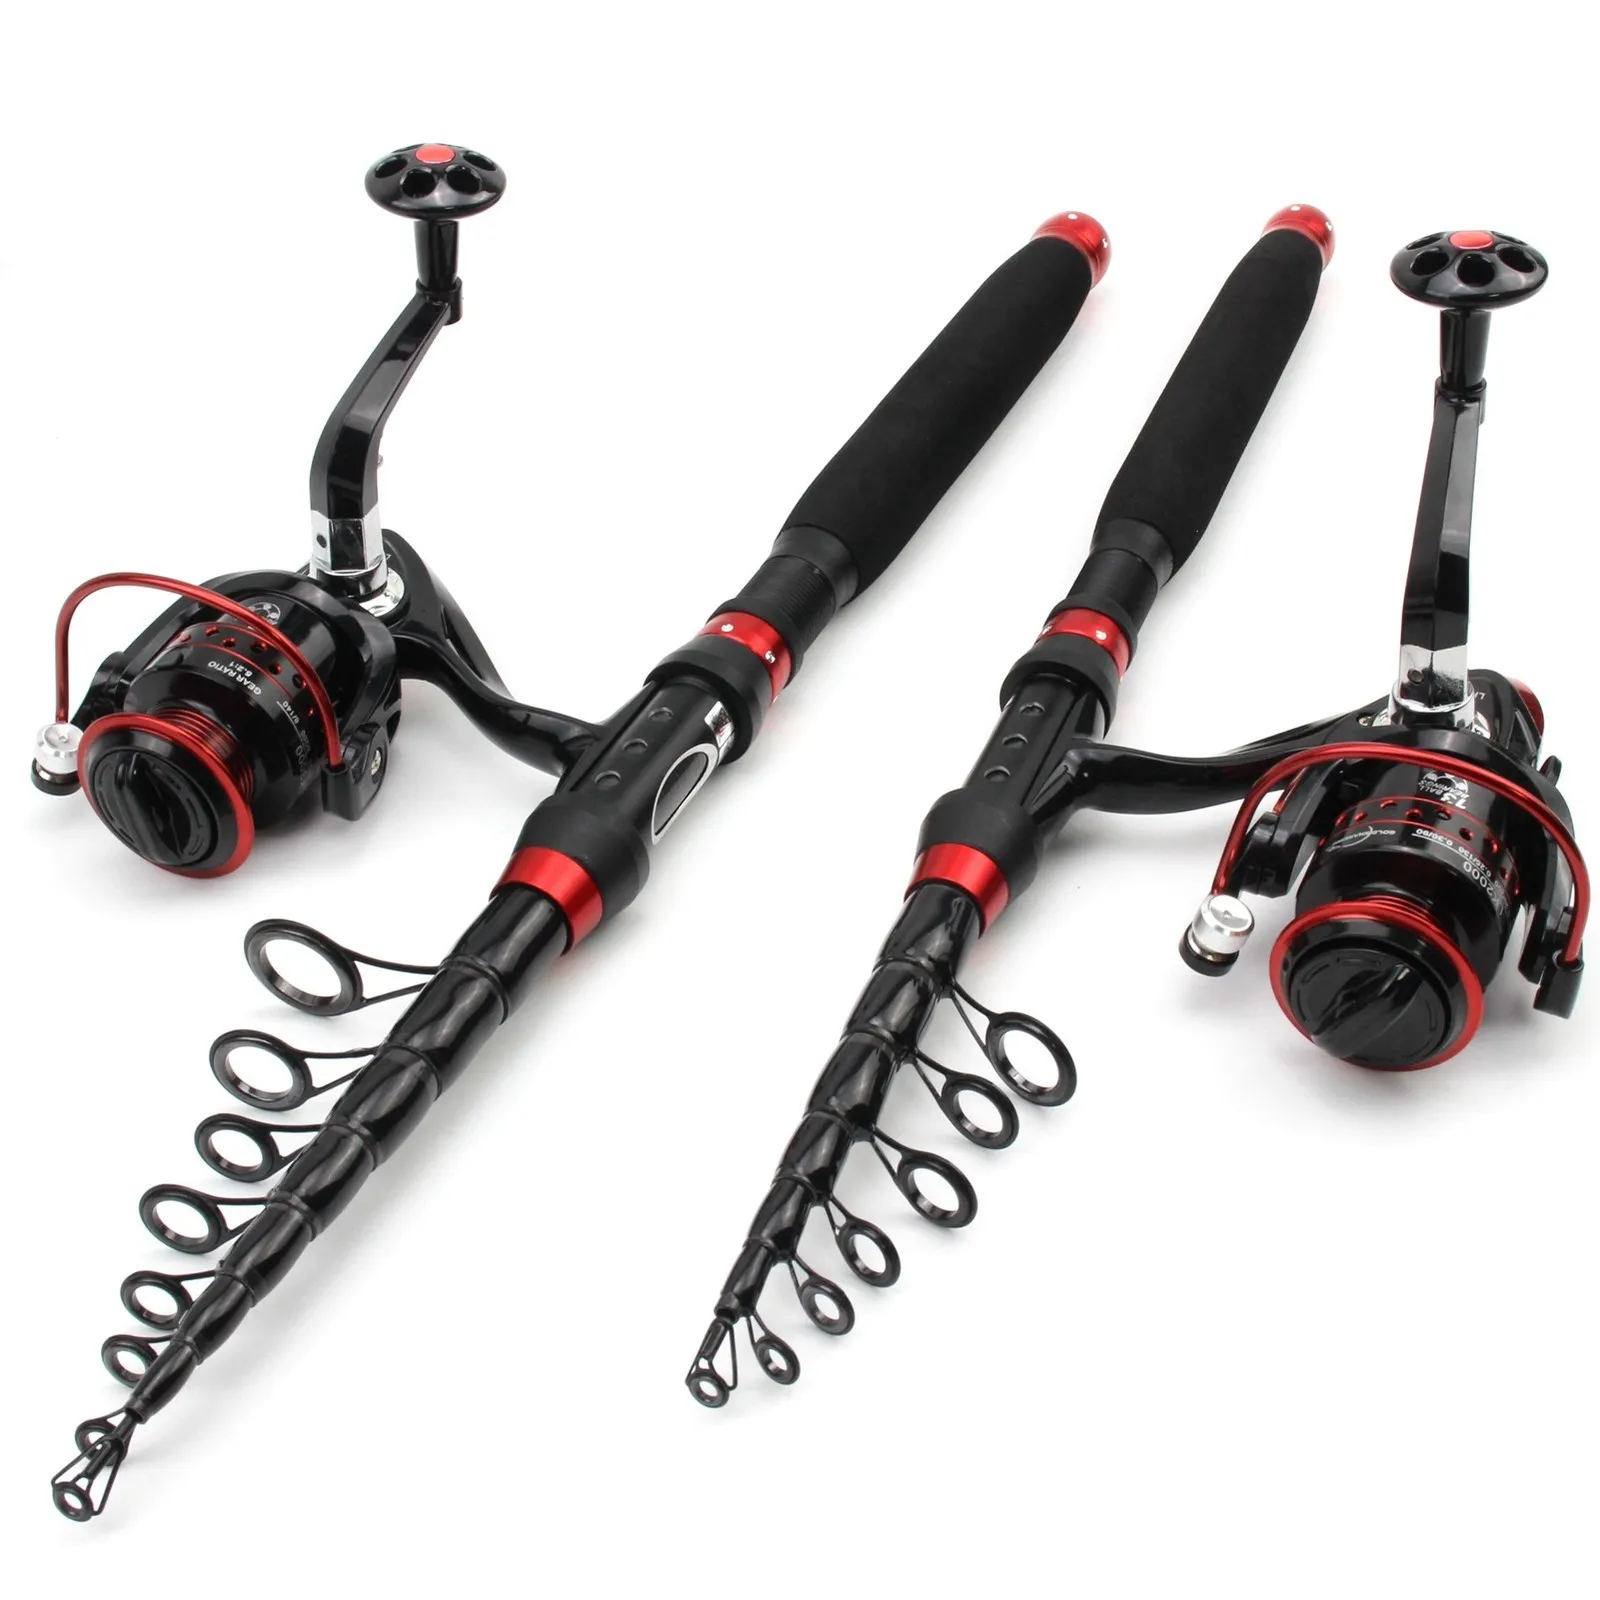 Boat Fishing Rods 21M 24M 27M 30M Carbon Rod Telescopic Spinning And Reels  Multifunction Set Beginner Fishing 230904 From Fan06, $22.63